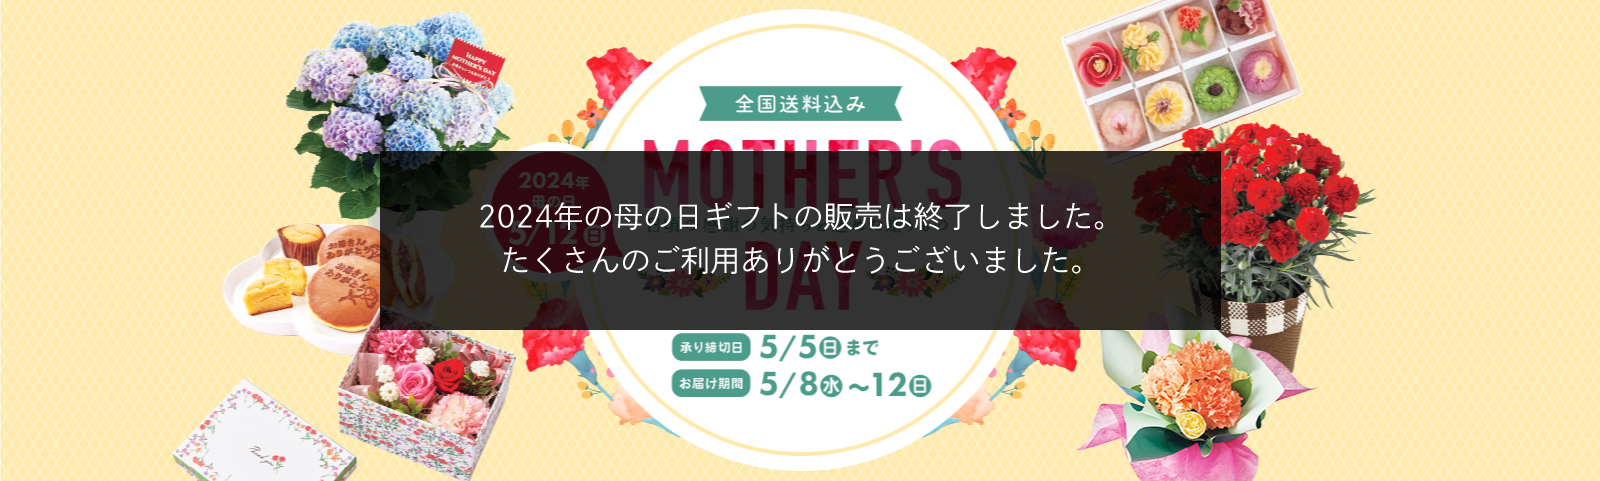 Mother's Day 日頃の感謝の気持ちを込めた贈り物 2024年母の日5月12日日曜日 全国送料込み 承り締切日 5月5日日曜日まで お届け期間 5月8日水曜日から12日日曜日まで